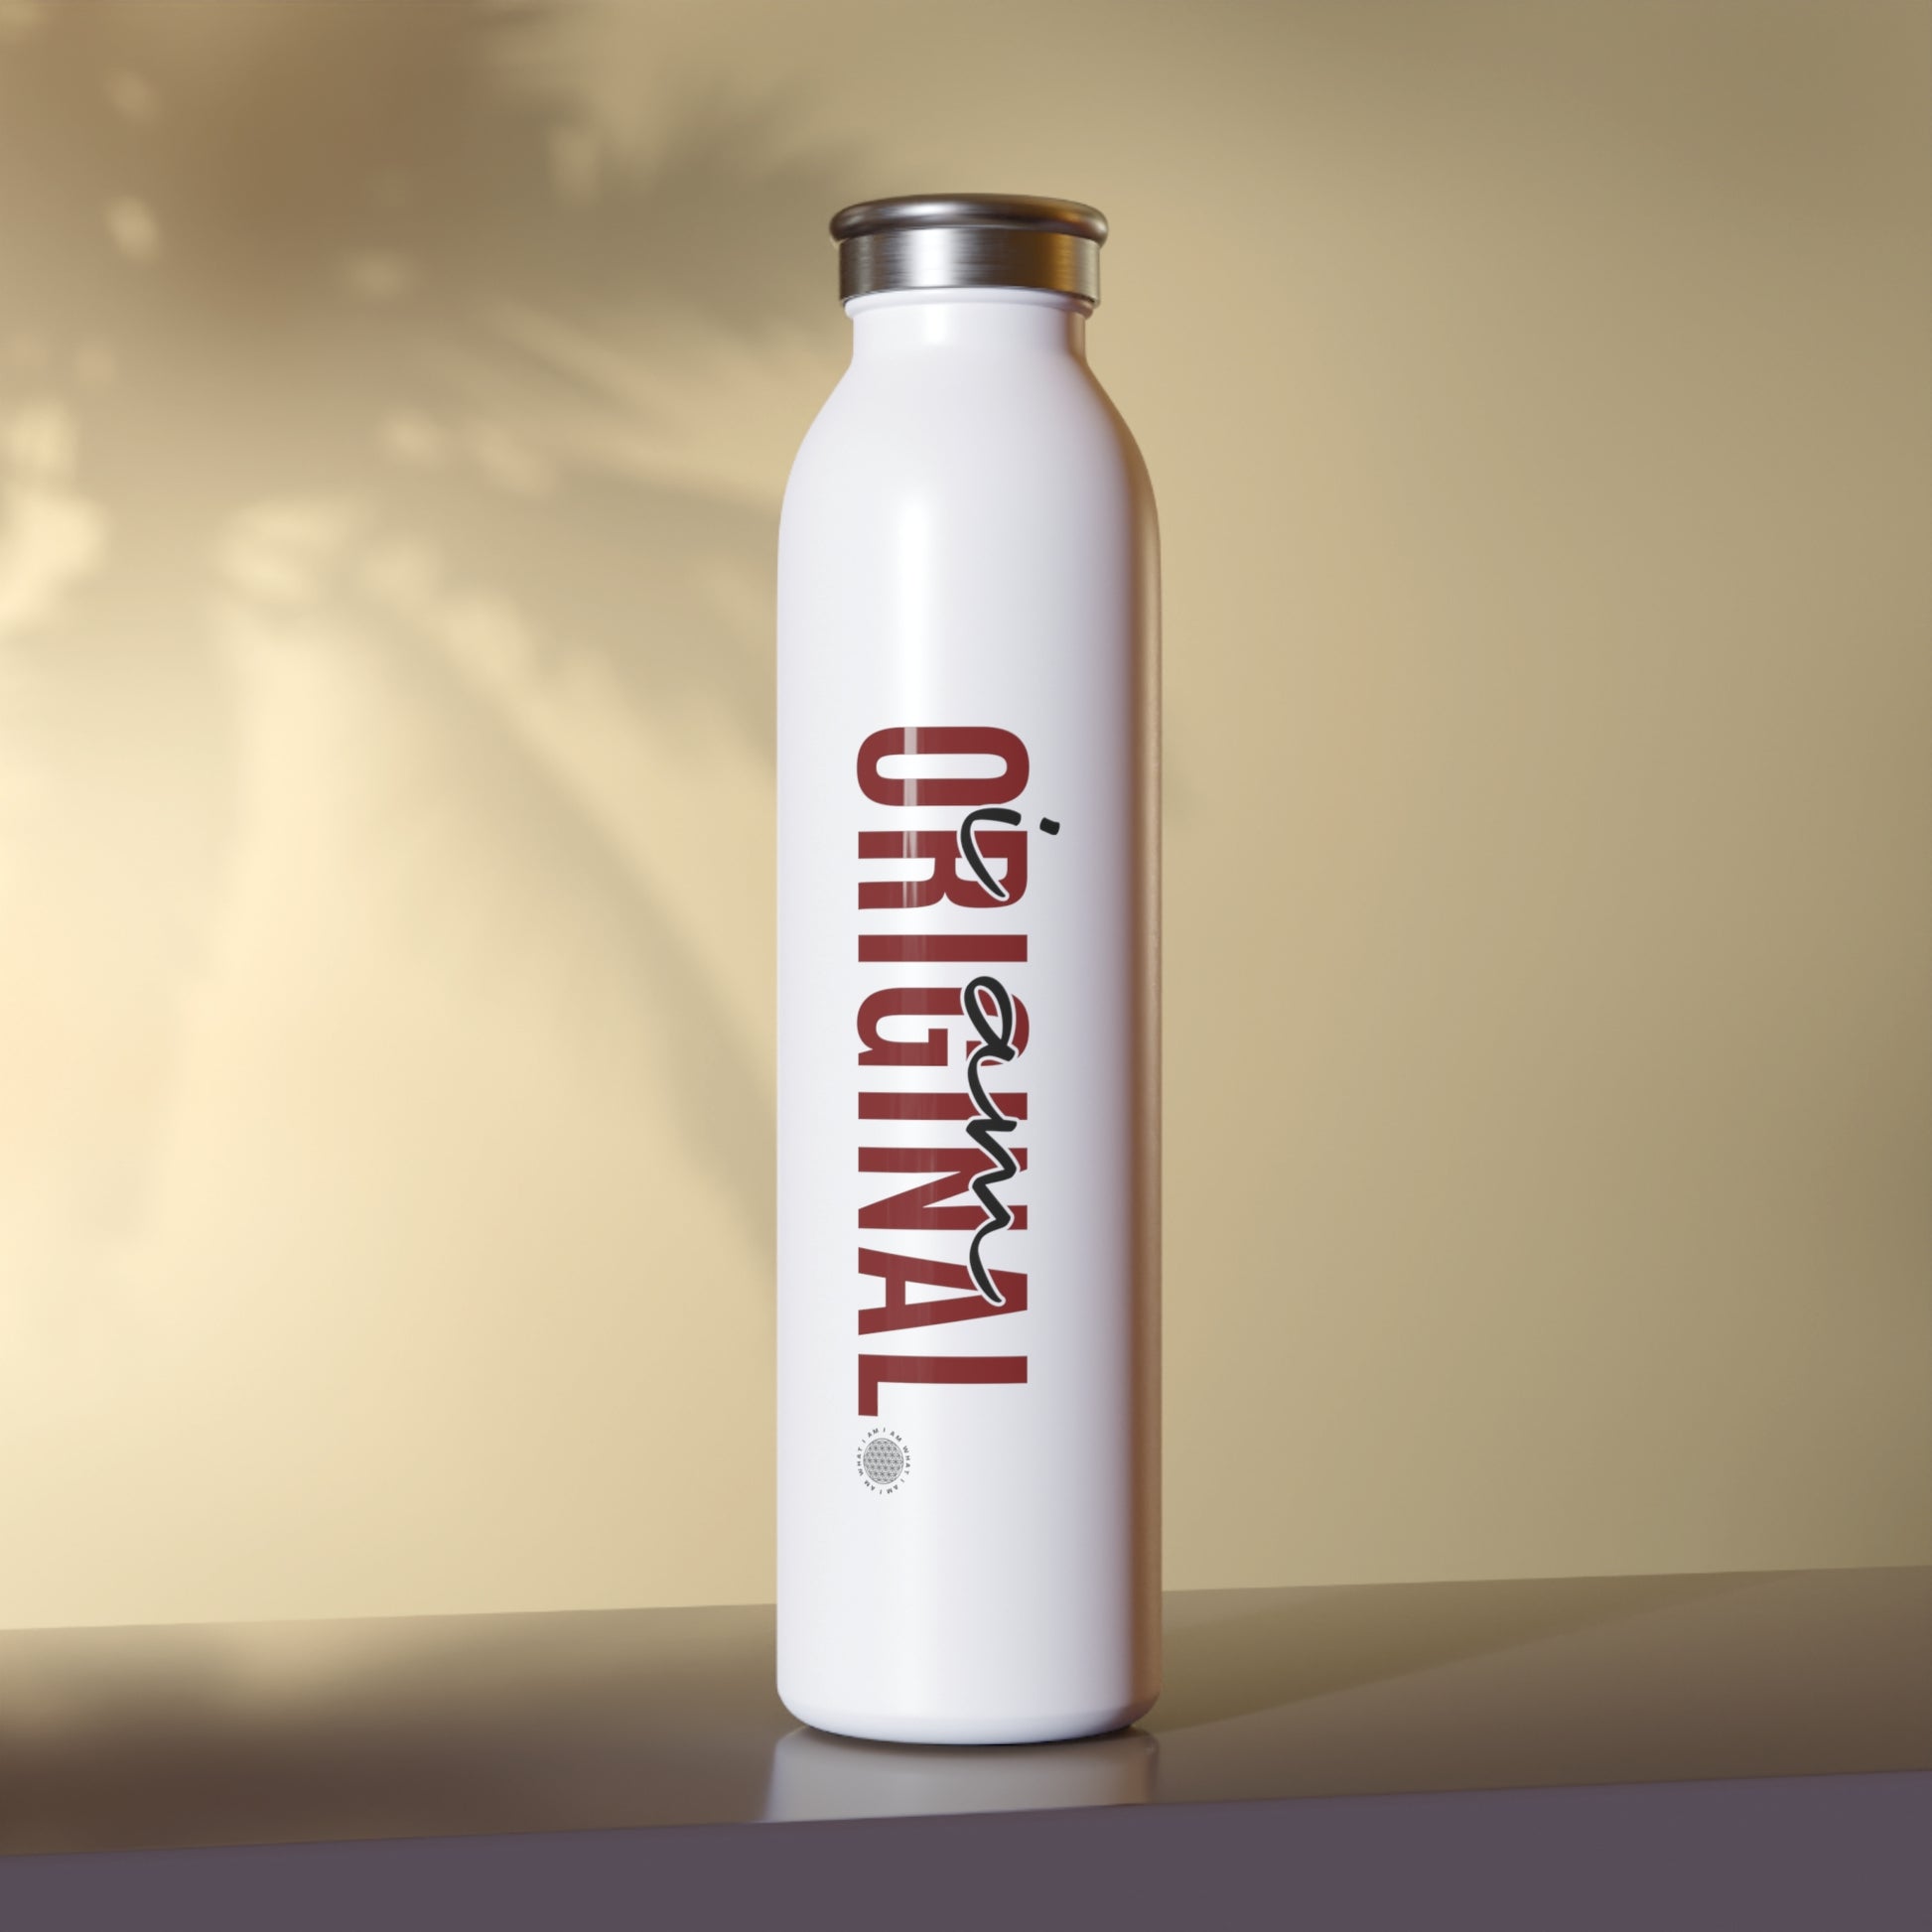 Our I Am Original affirmation water bottle is one of our positive affirmations for mental health. Positive thinking keeps our mindset happy and healthy. This personalized water bottle was designed to become a creator’s favorite canvas of expression.